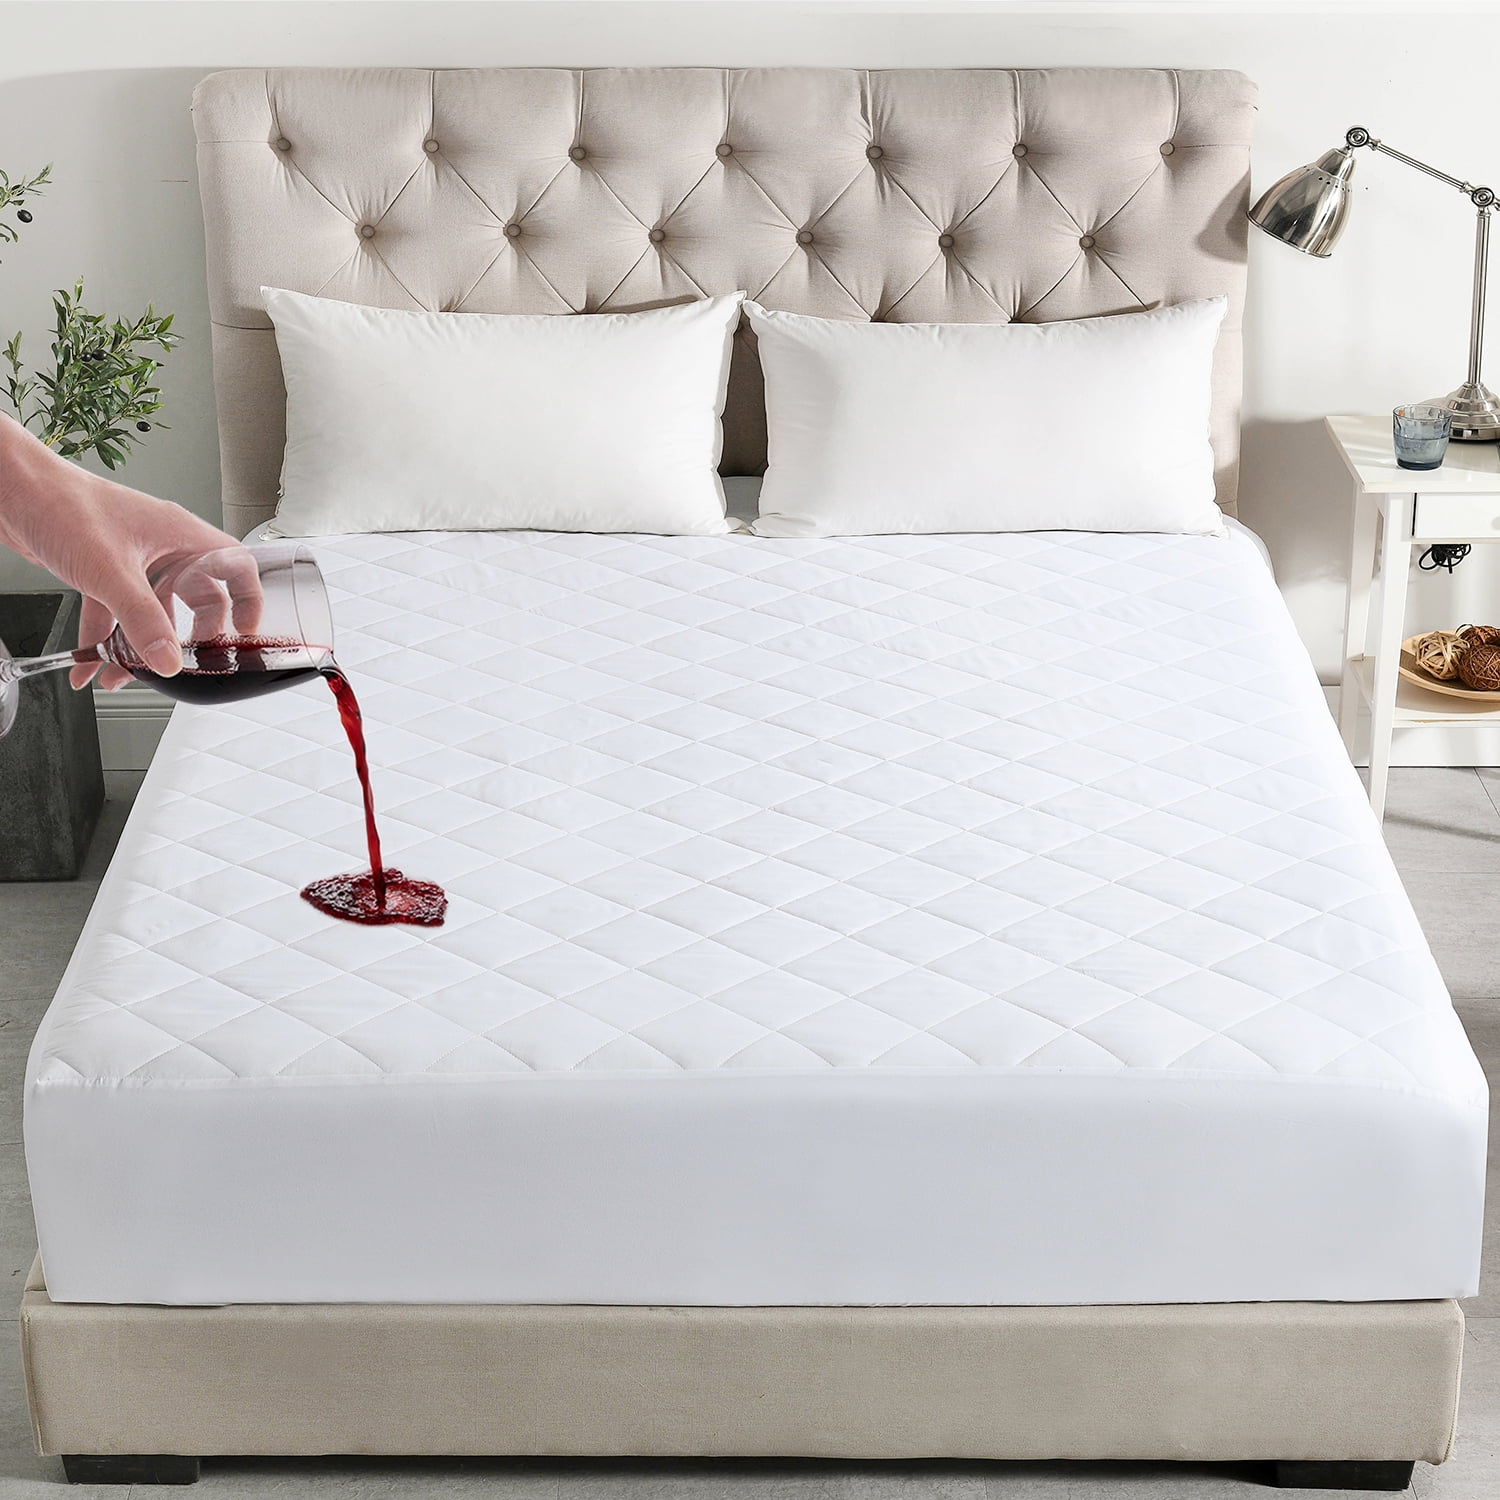 Waterproof Mattress Protector Bed Pad Cover Case Deep Fitted Noisless Cotton NEW 